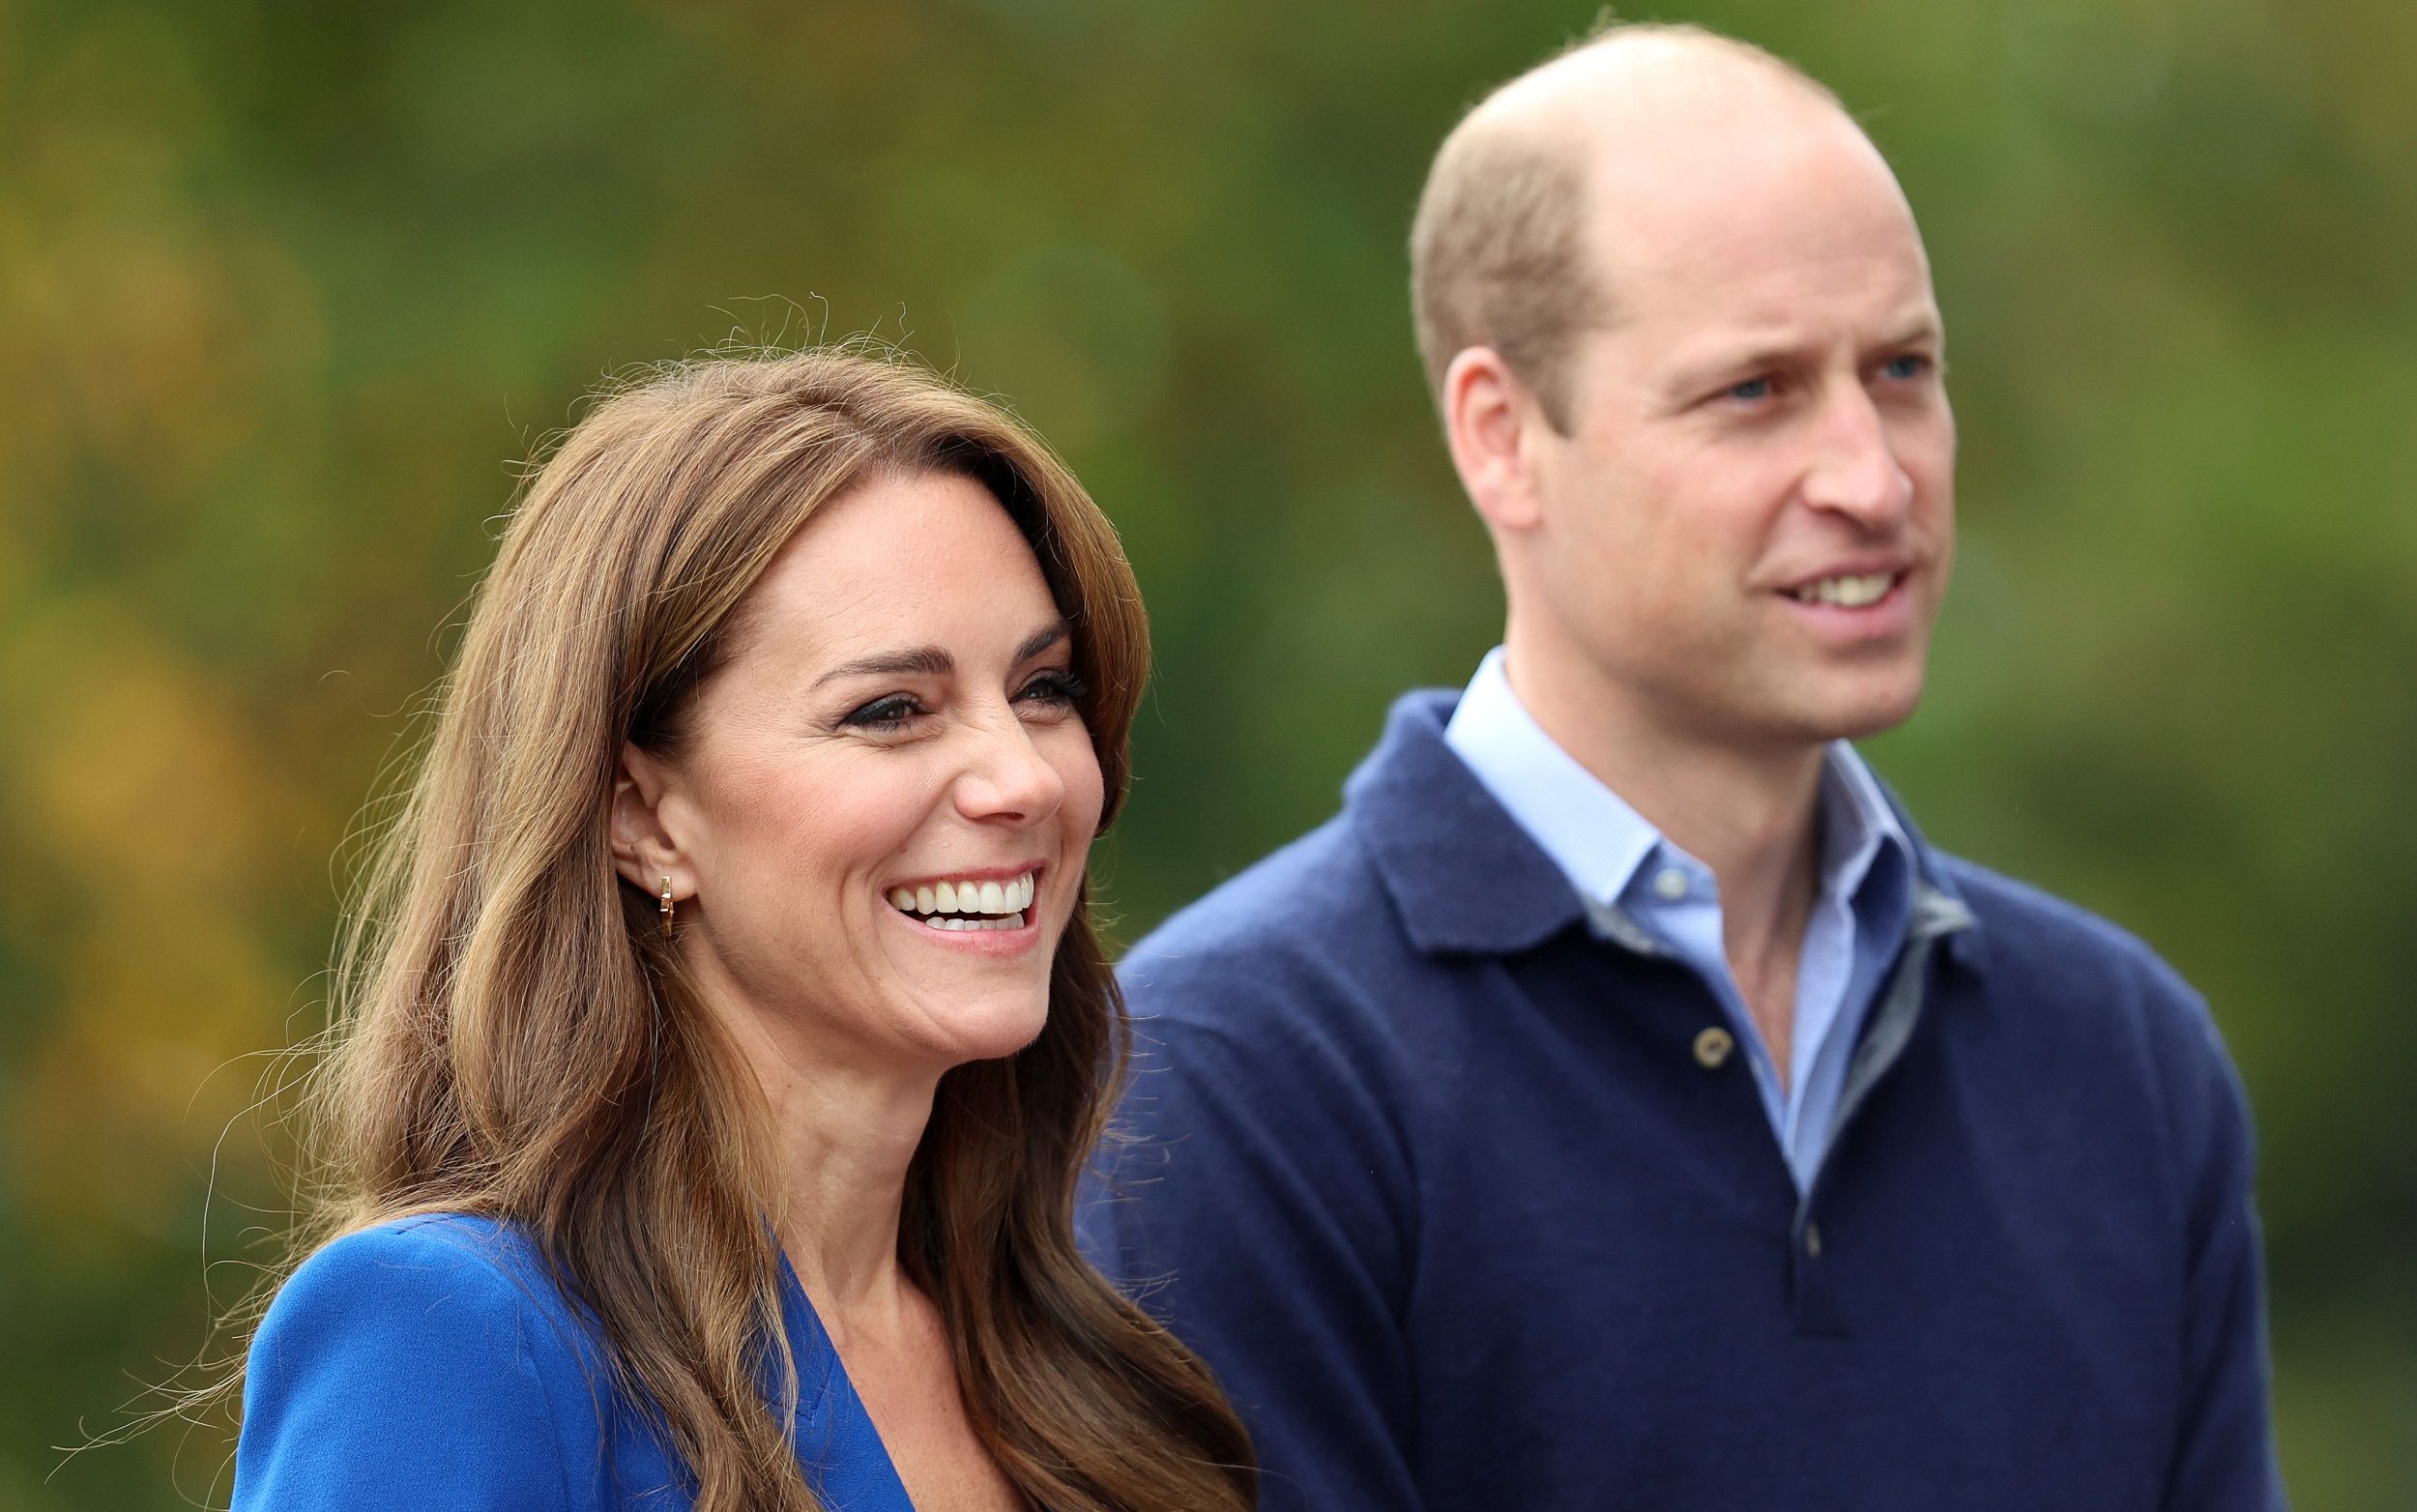 prince william reveals first public engagements since princess of wales’s cancer diagnosis